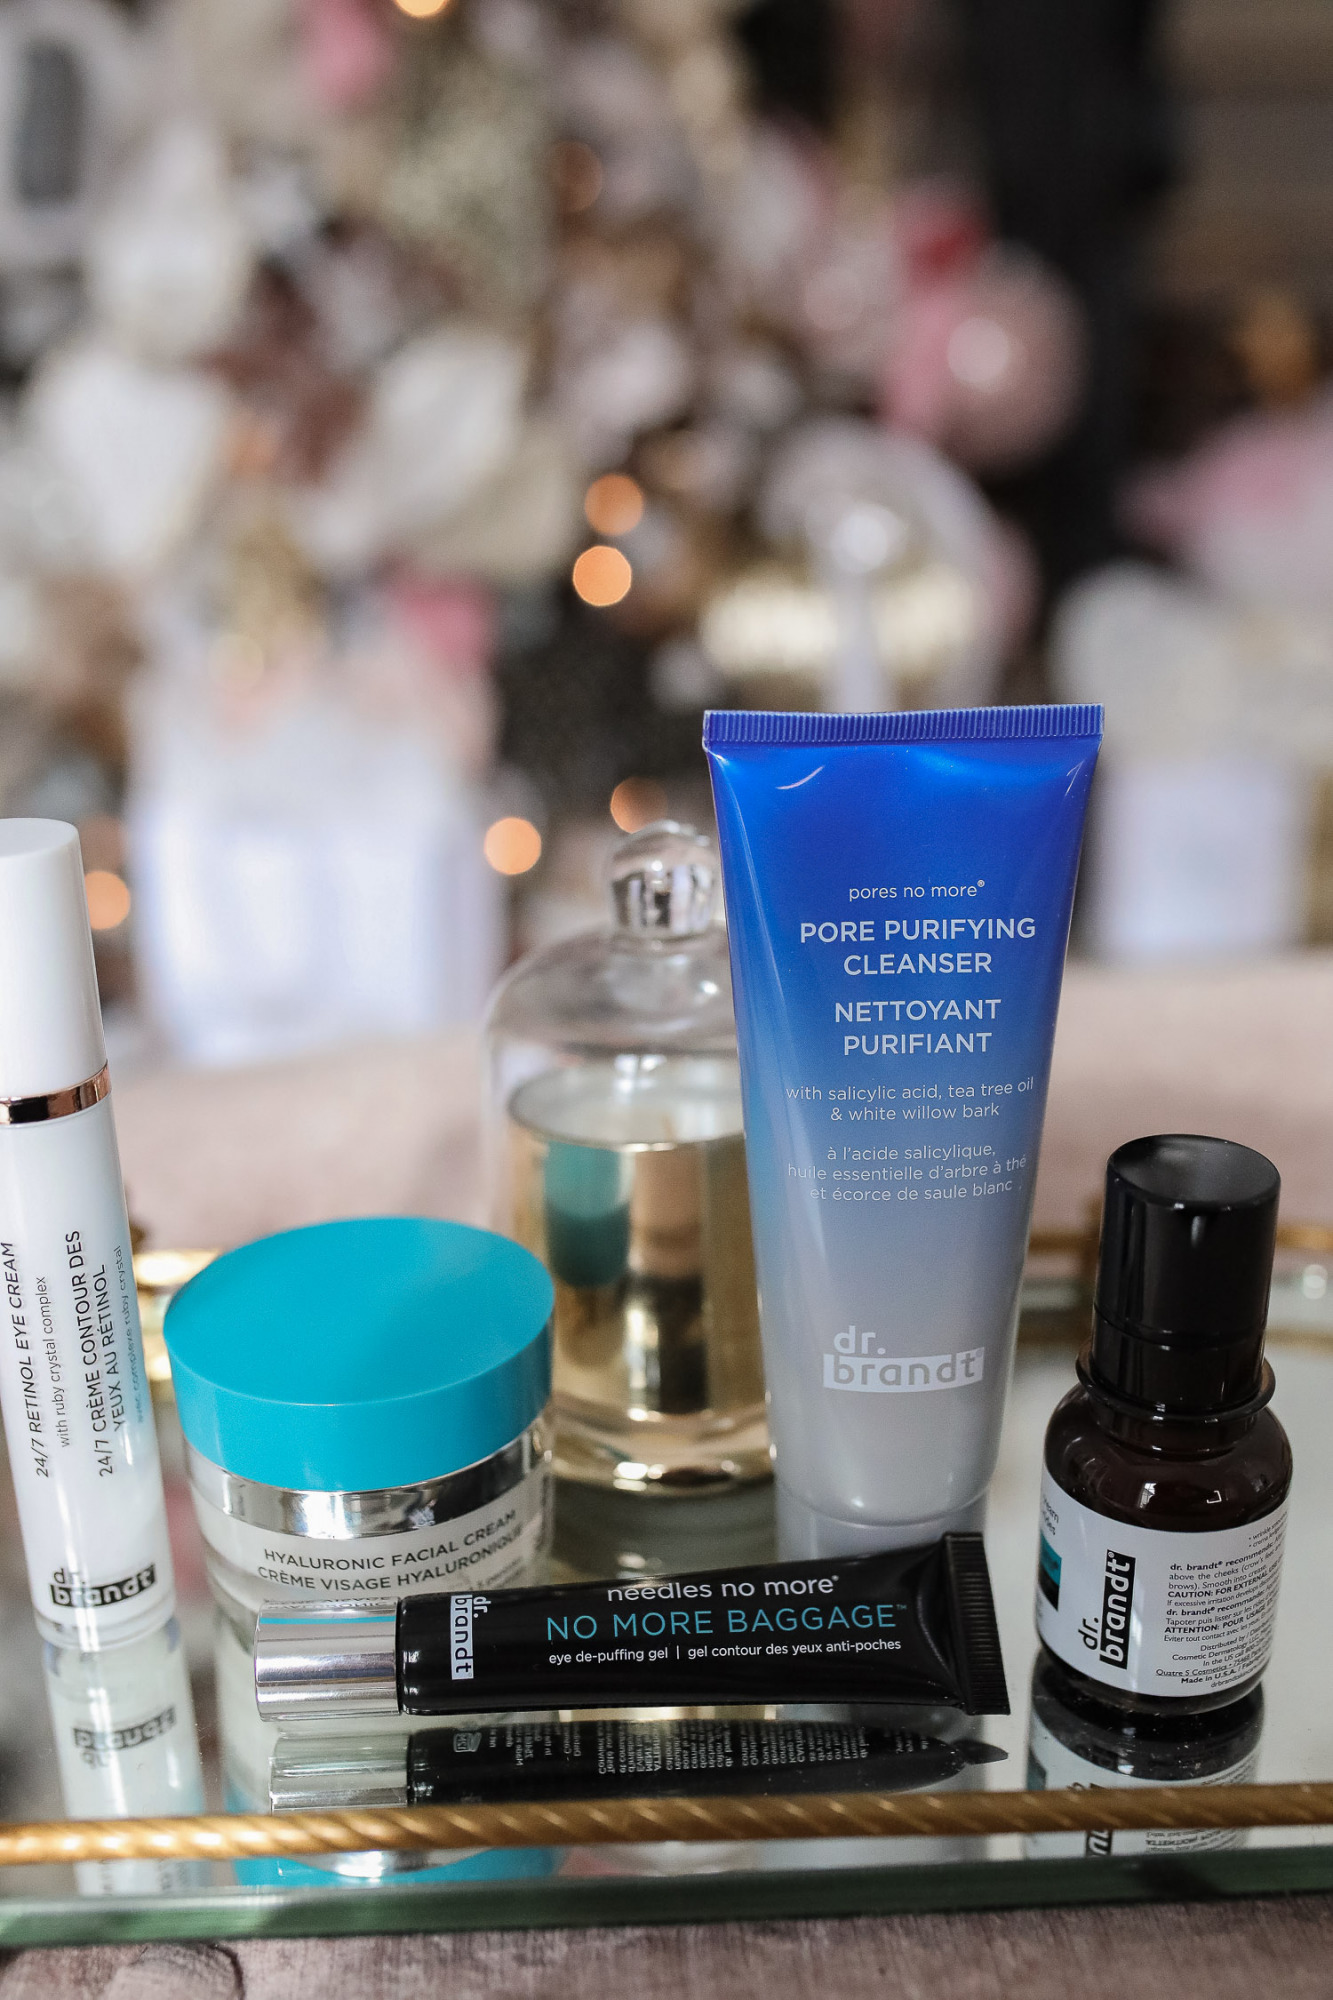 Dr Brandt review eye baggage, best dr brandt products, Dr Brandt Pores No More, Emily Gemma |Dr. Brandt by popular US beauty blog, The Sweetest Thing: image of Dr. Brandt skincare products. 